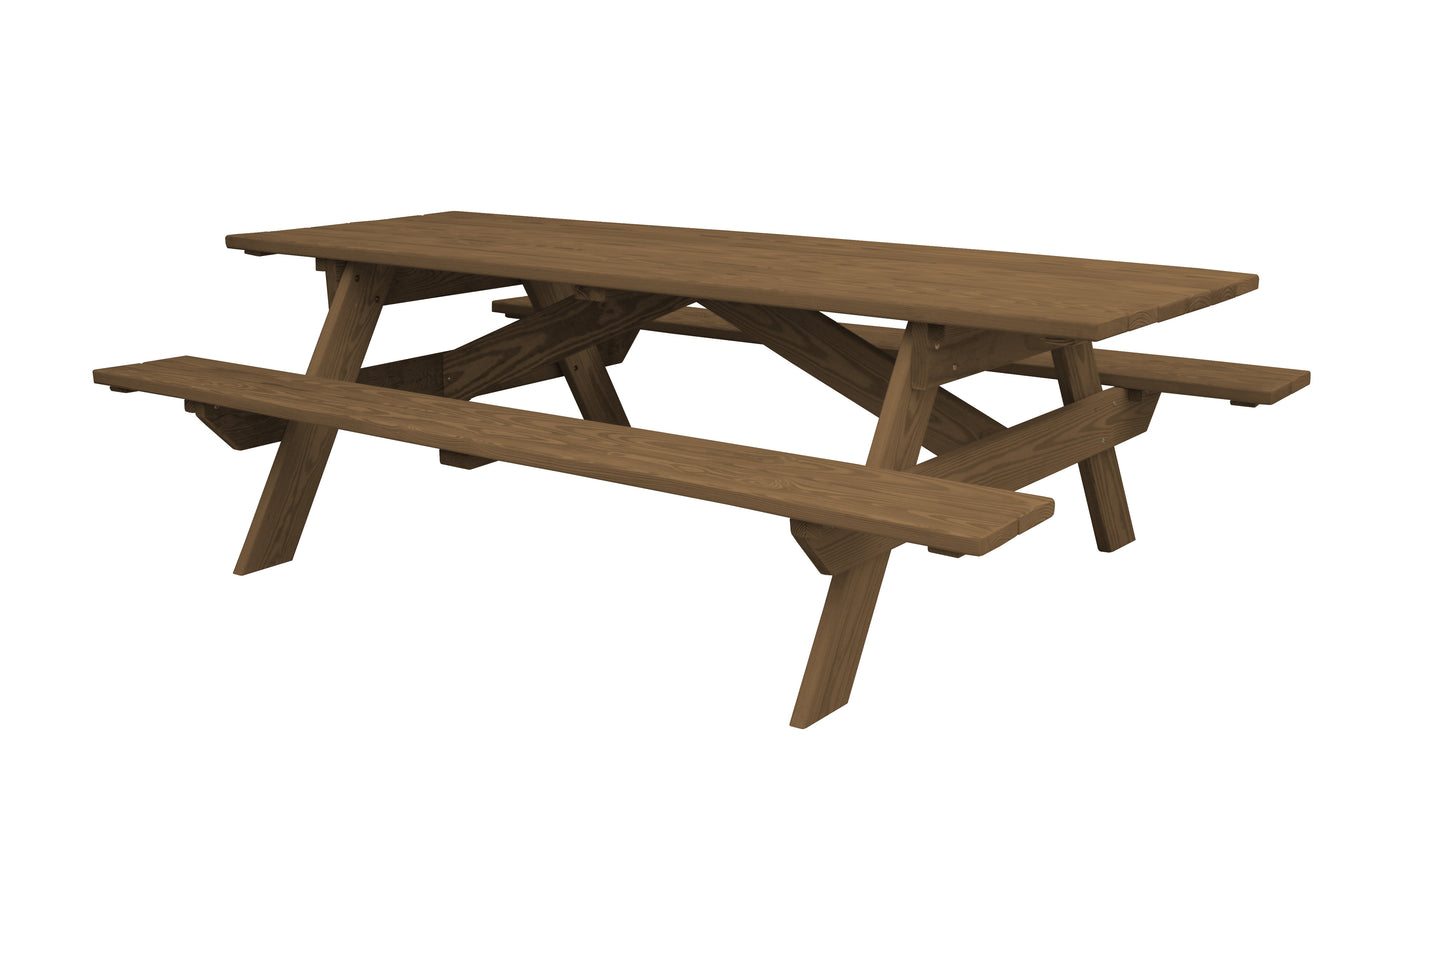 A&L Furniture Co. Pressure Treated Pine 8' Heavy Duty Park Picnic Table - Specify for FREE 2" Umbrella Hole - LEAD TIME TO SHIP 10 BUSINESS DAYS